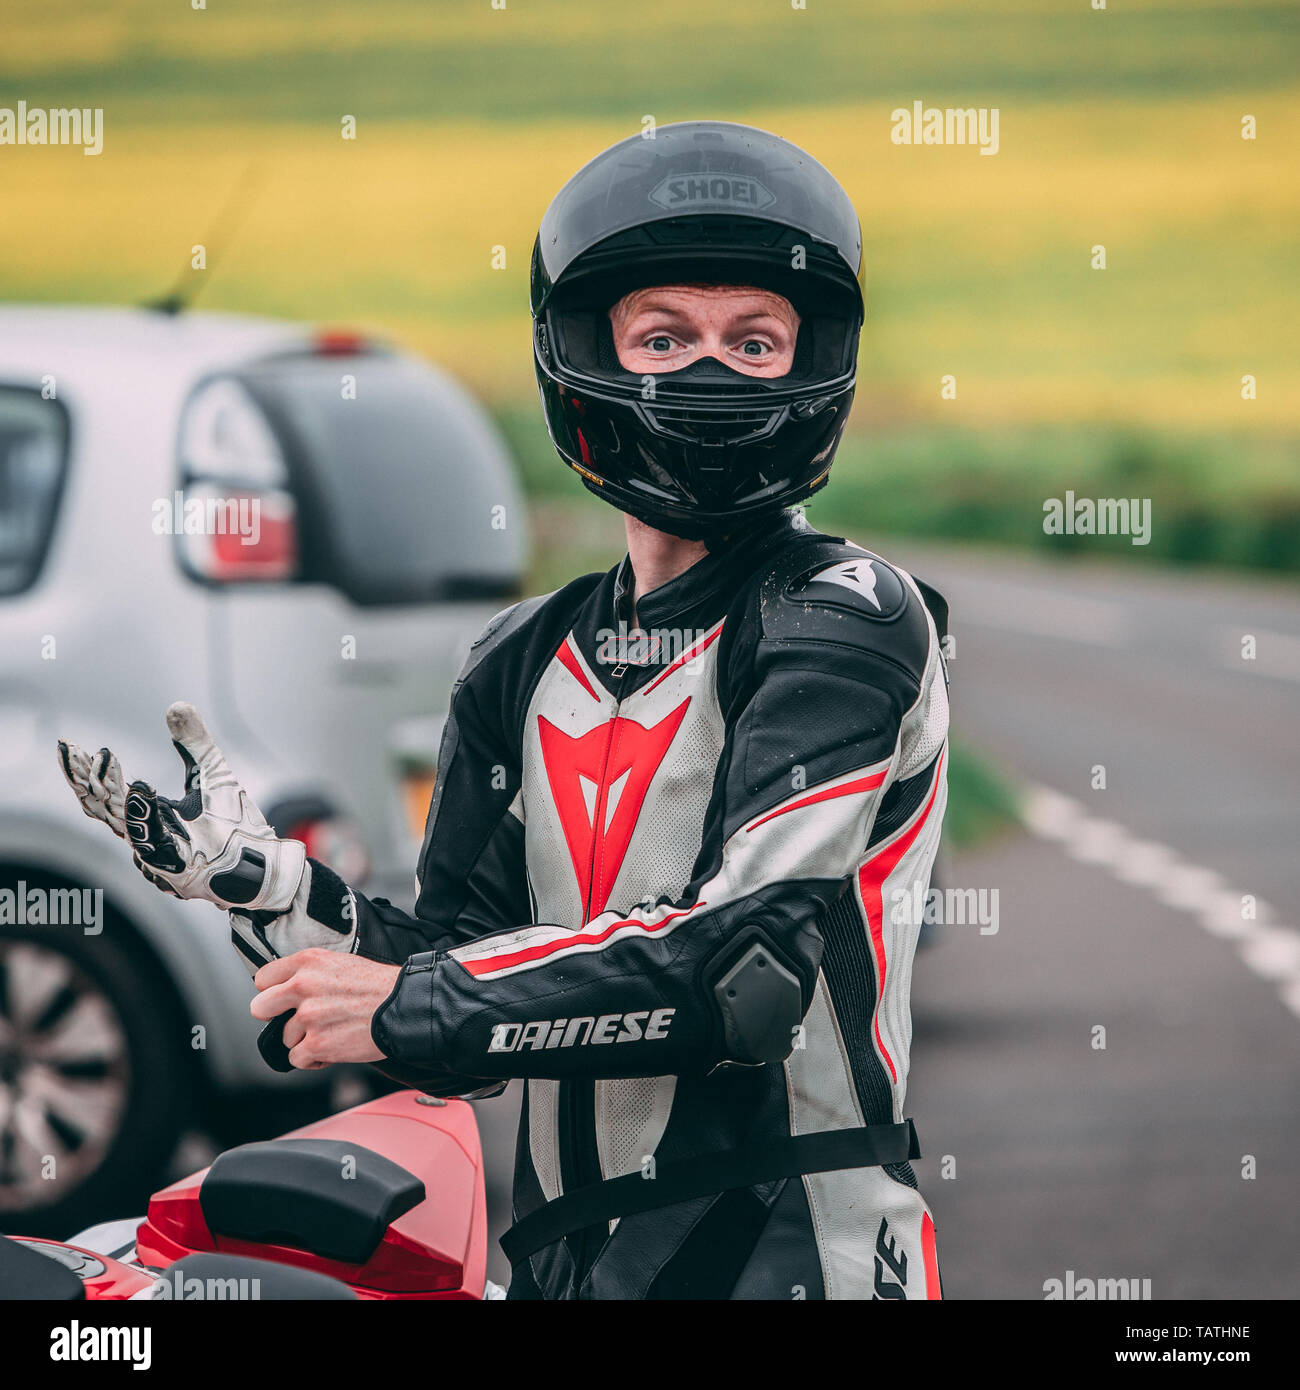 Getting ready to ride. Motorcyclist. Stock Photo